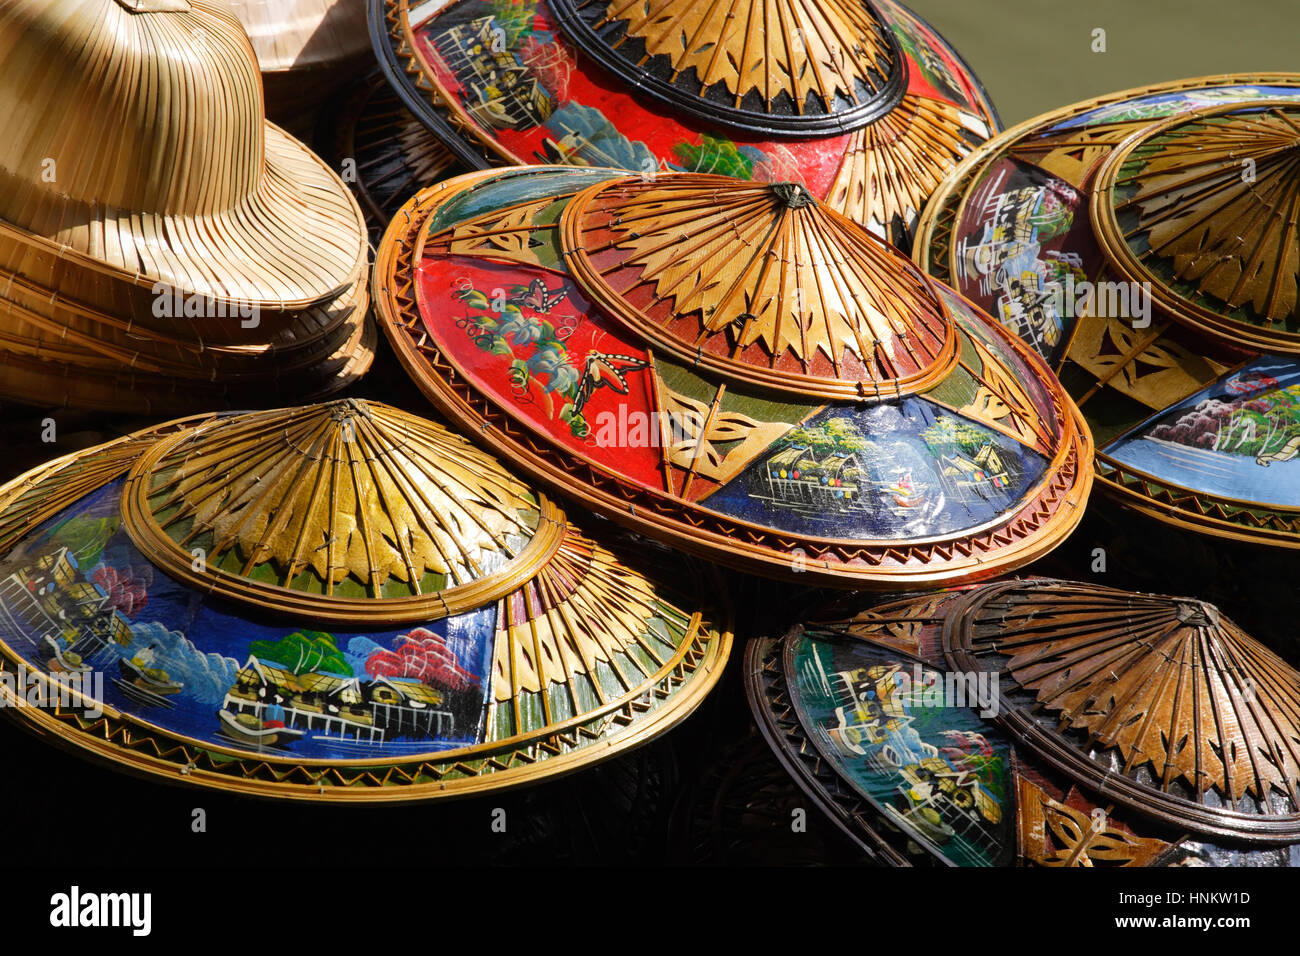 Photo of hundreds of souvenir hats piled high for tourists to buy while visiting Thailand. Stock Photo